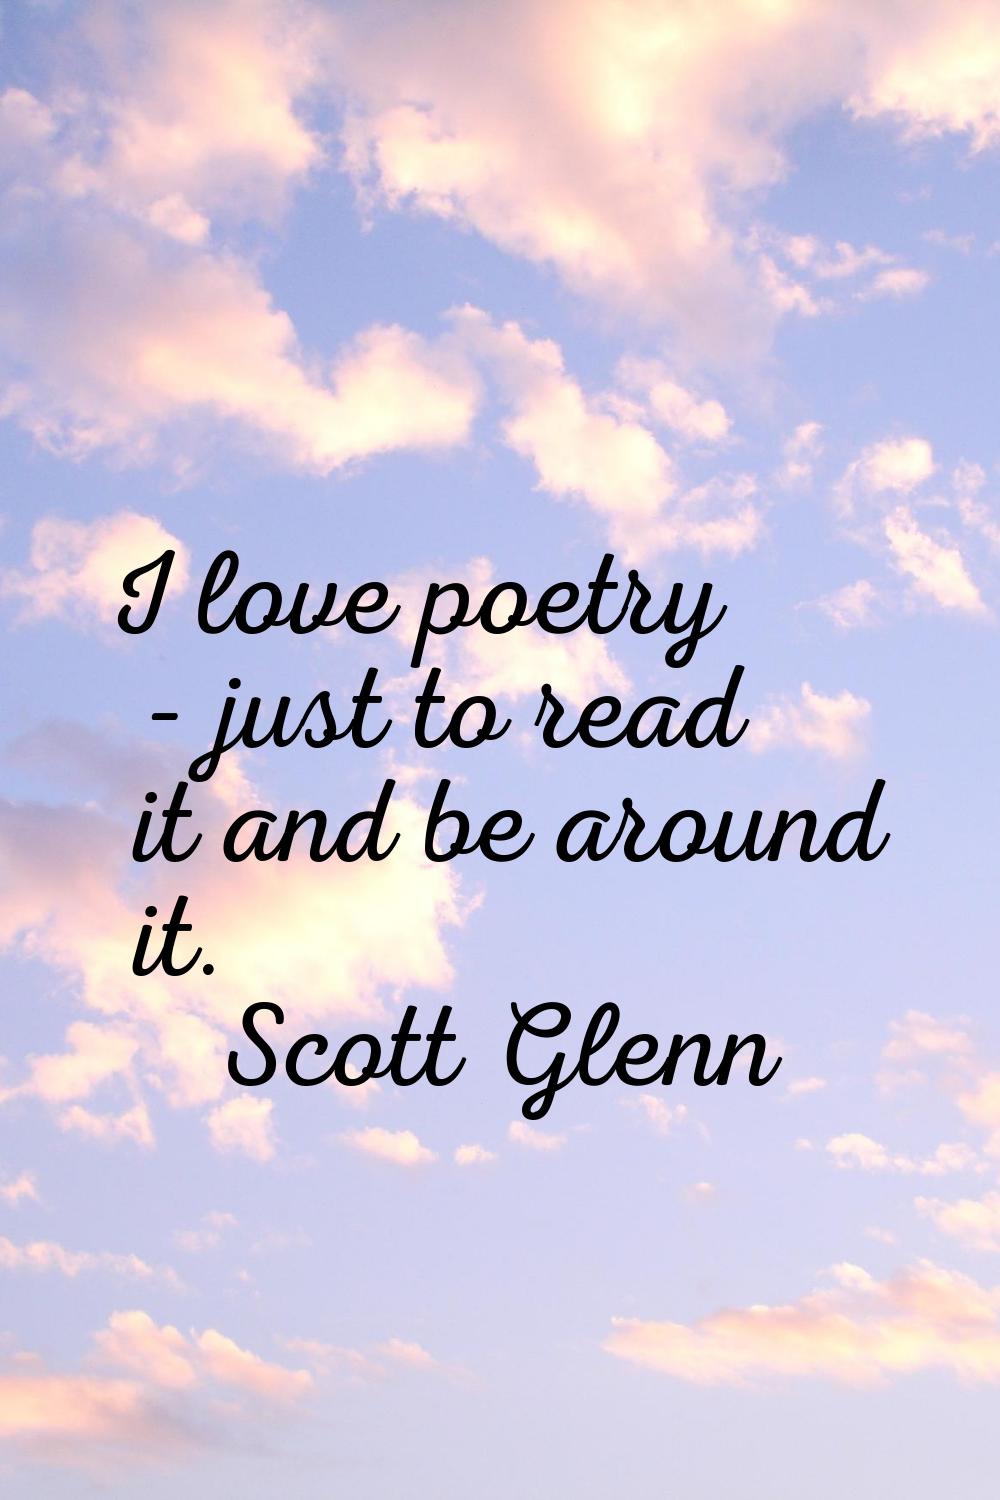 I love poetry - just to read it and be around it.